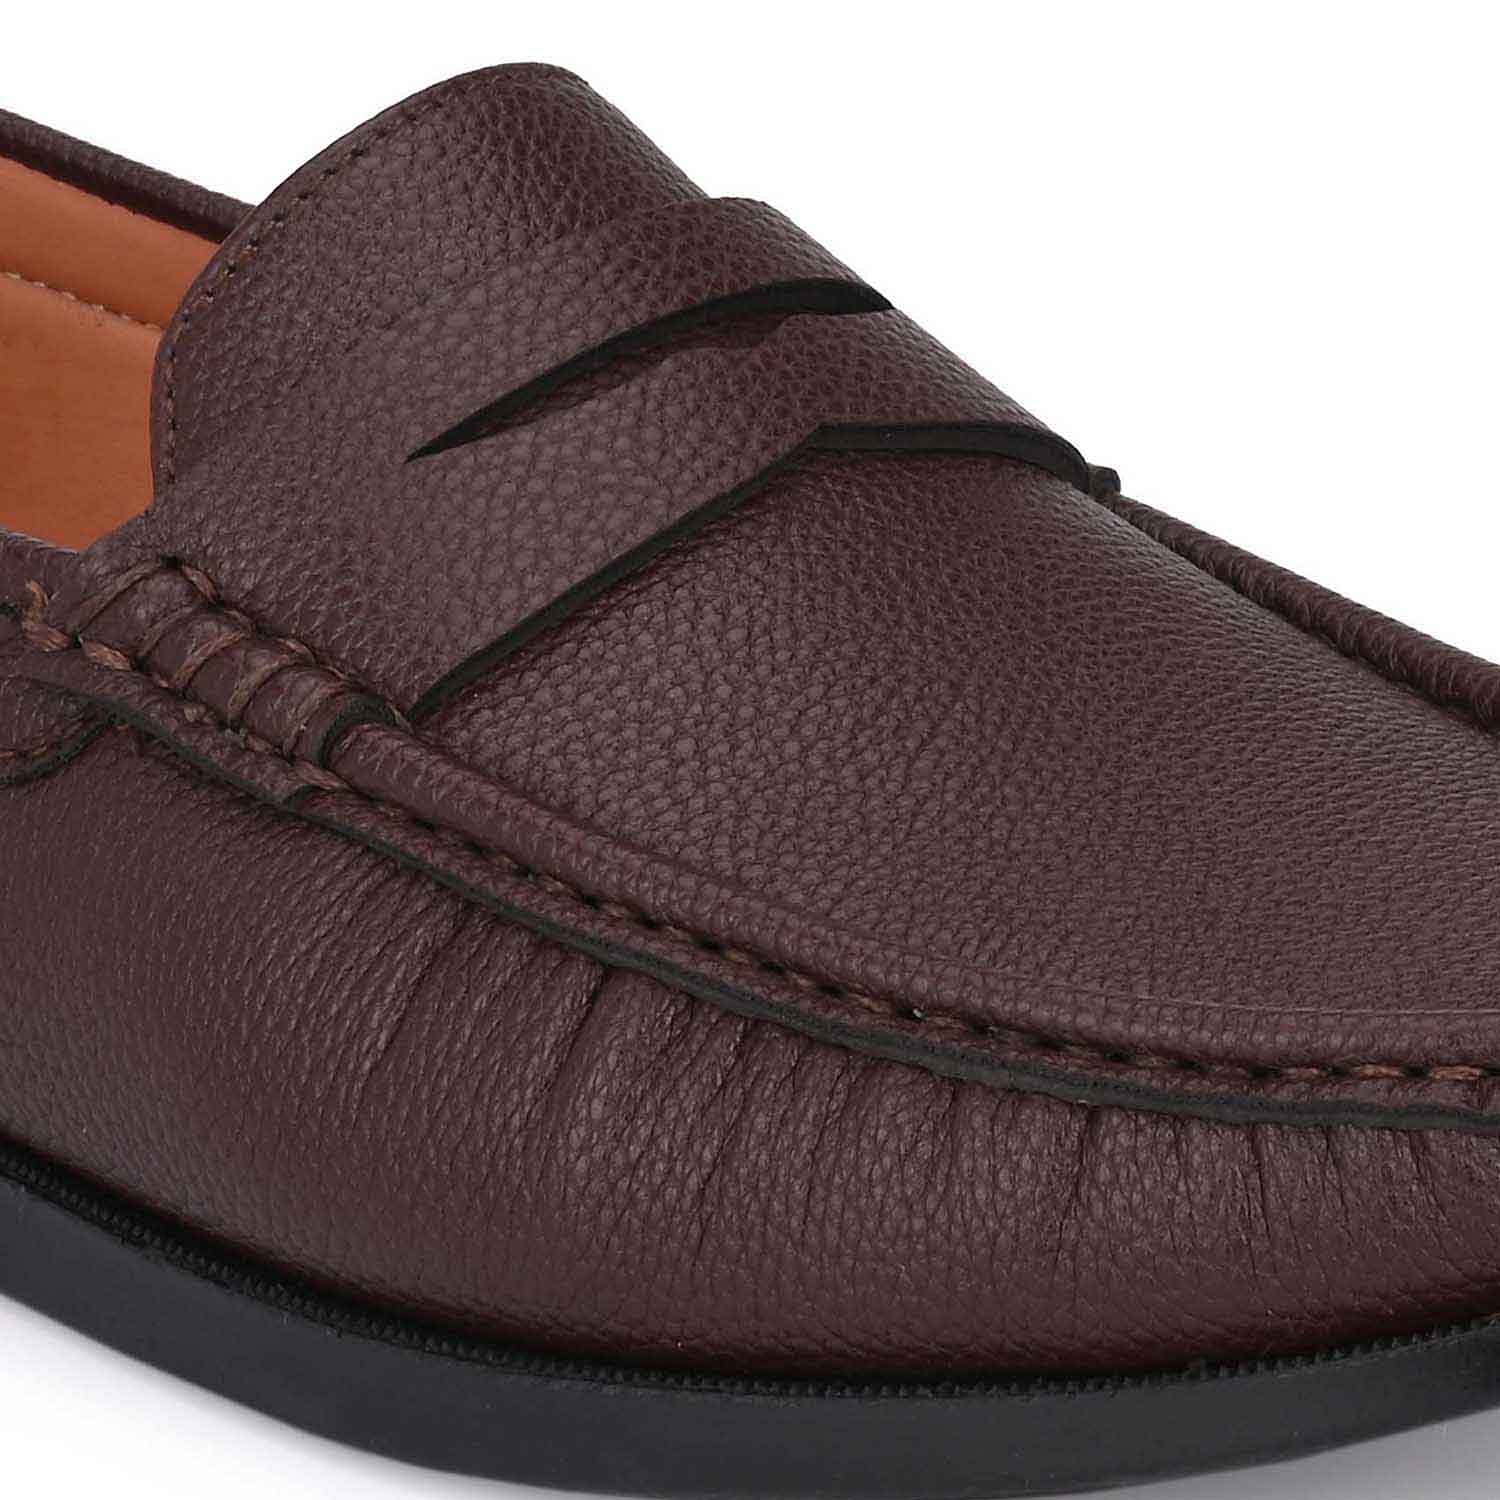 Pair-it Men's Loafers Shoes - Brown-LZ-Loafer110